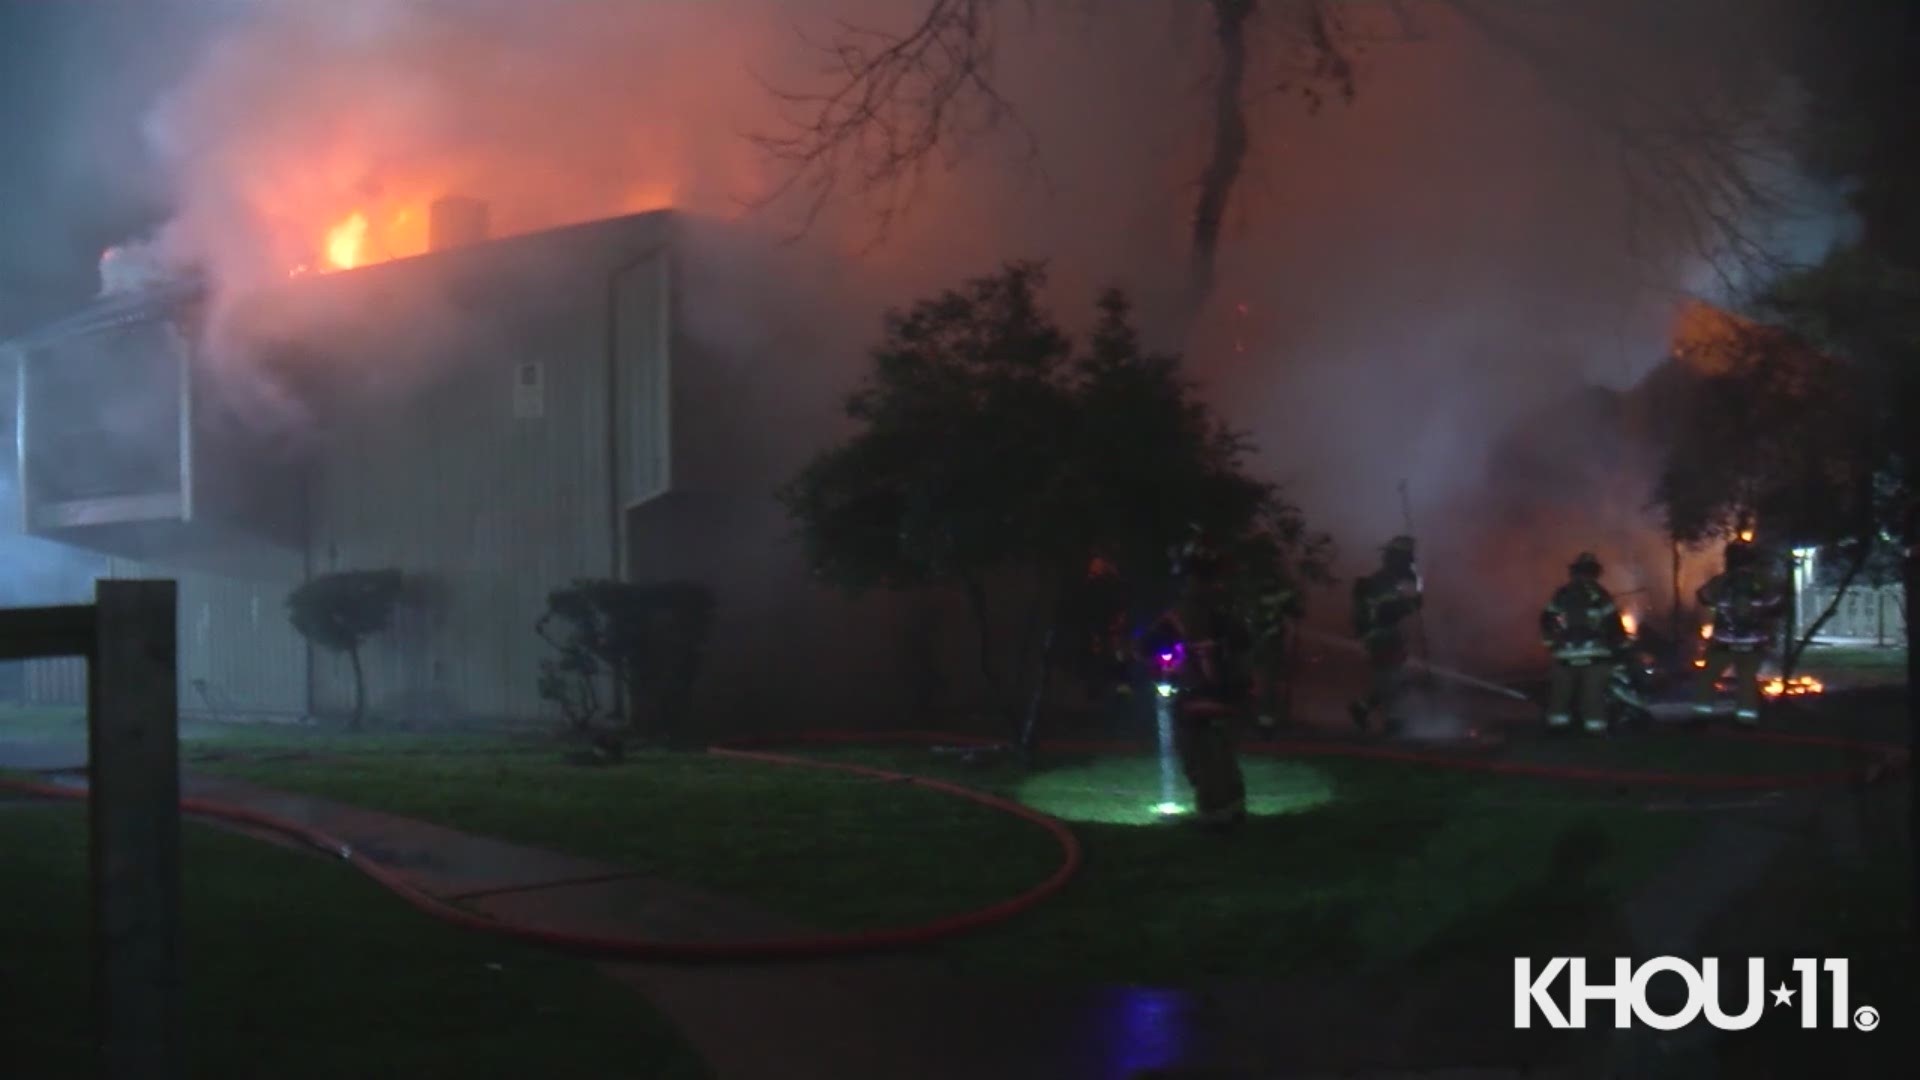 Eight apartment units were damaged by a fire overnight in northwest Houston.